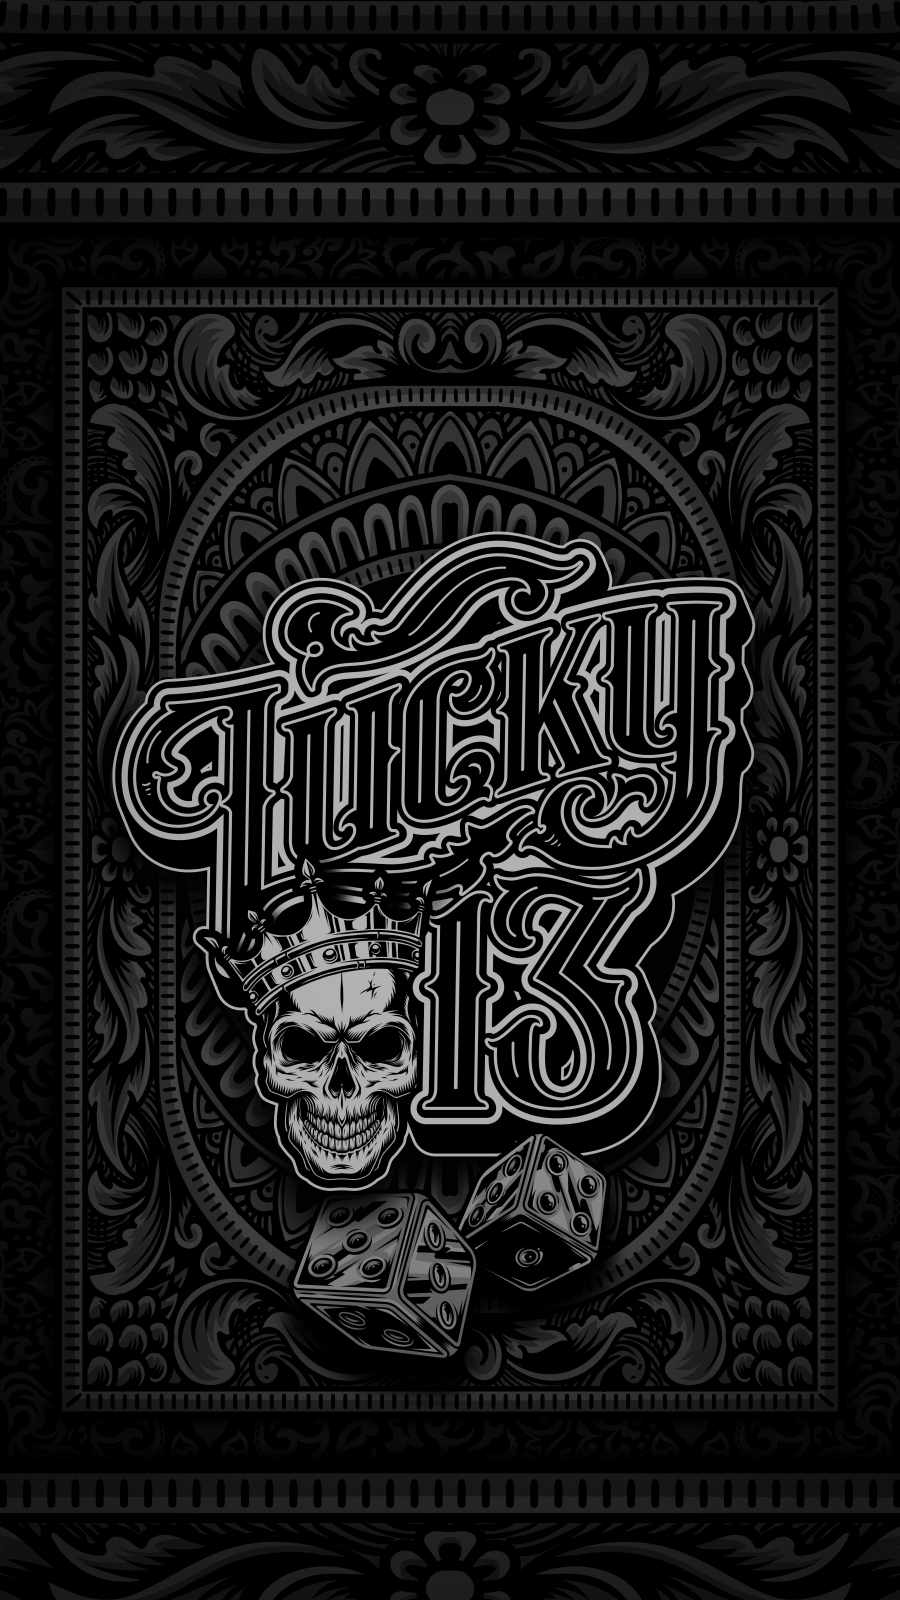 Lucky 13 HD IPhone Wallpaper - IPhone Wallpapers : iPhone Wallpapers